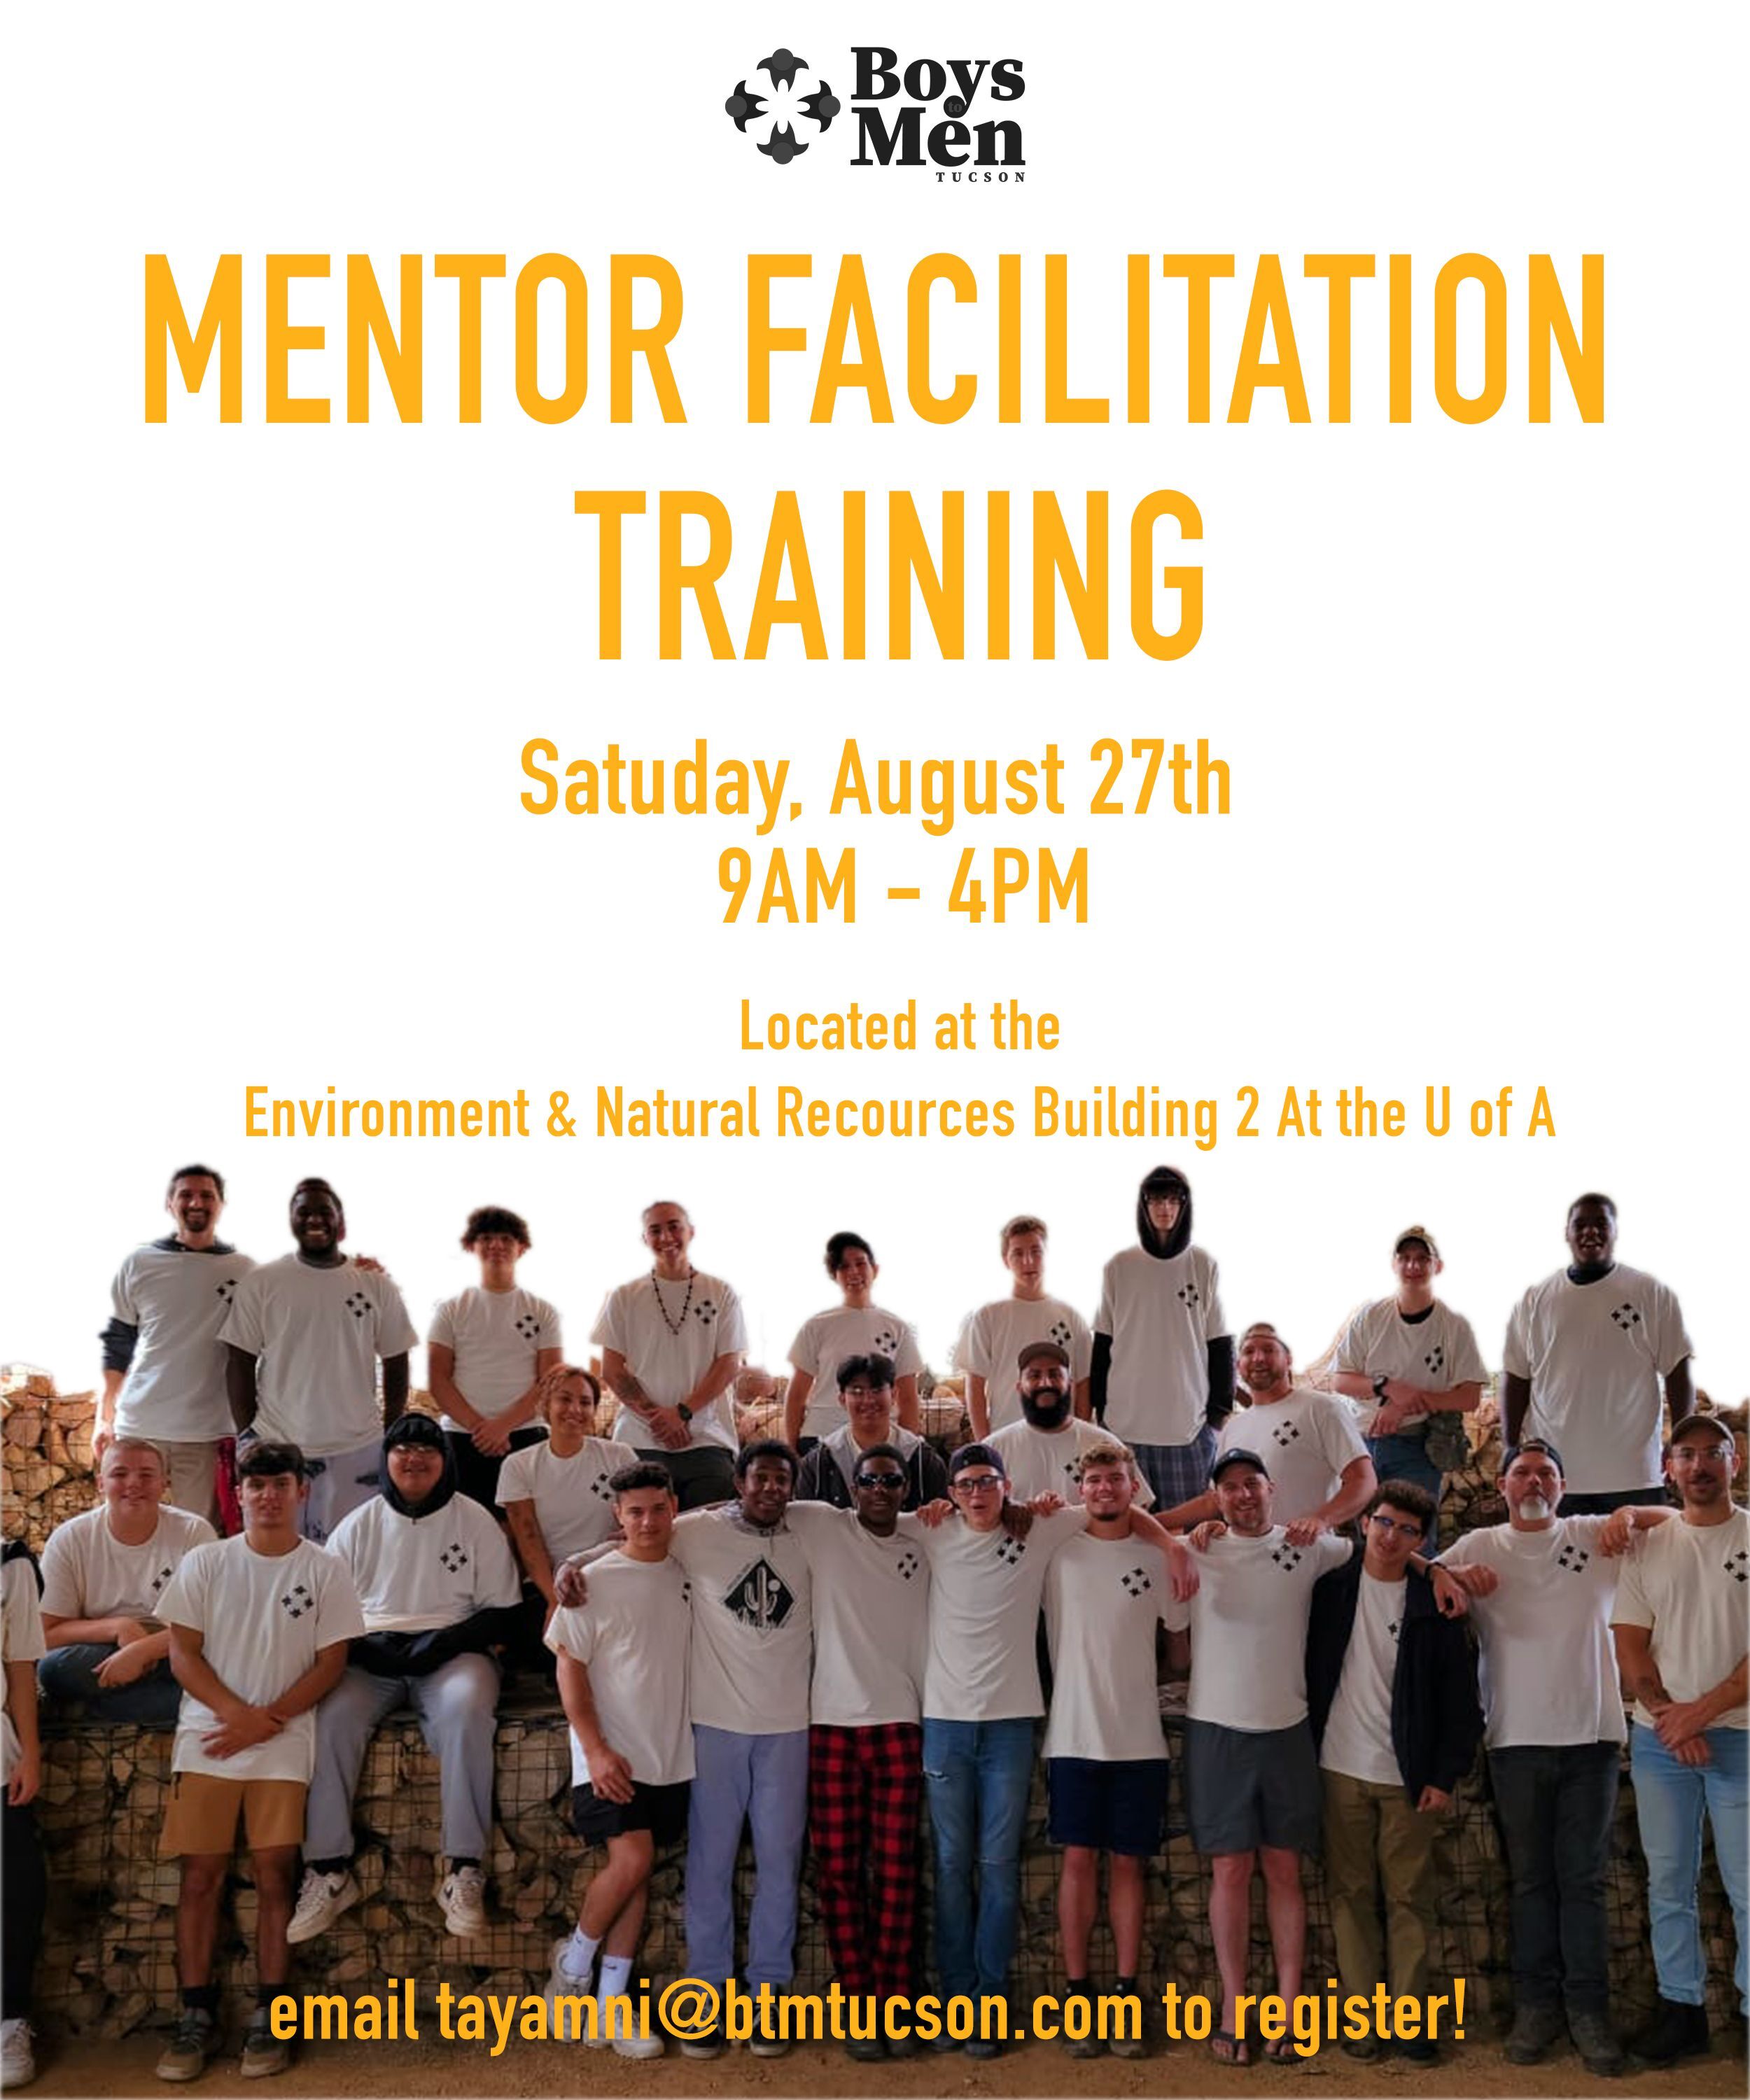 This training will take place in-person on Saturday, August 27th from 9am-4pm. Please keep in mind that your attendance is mandatory in order to become a mentor. Once you register, you will receive a confirmation email a week before the event. Thank you f